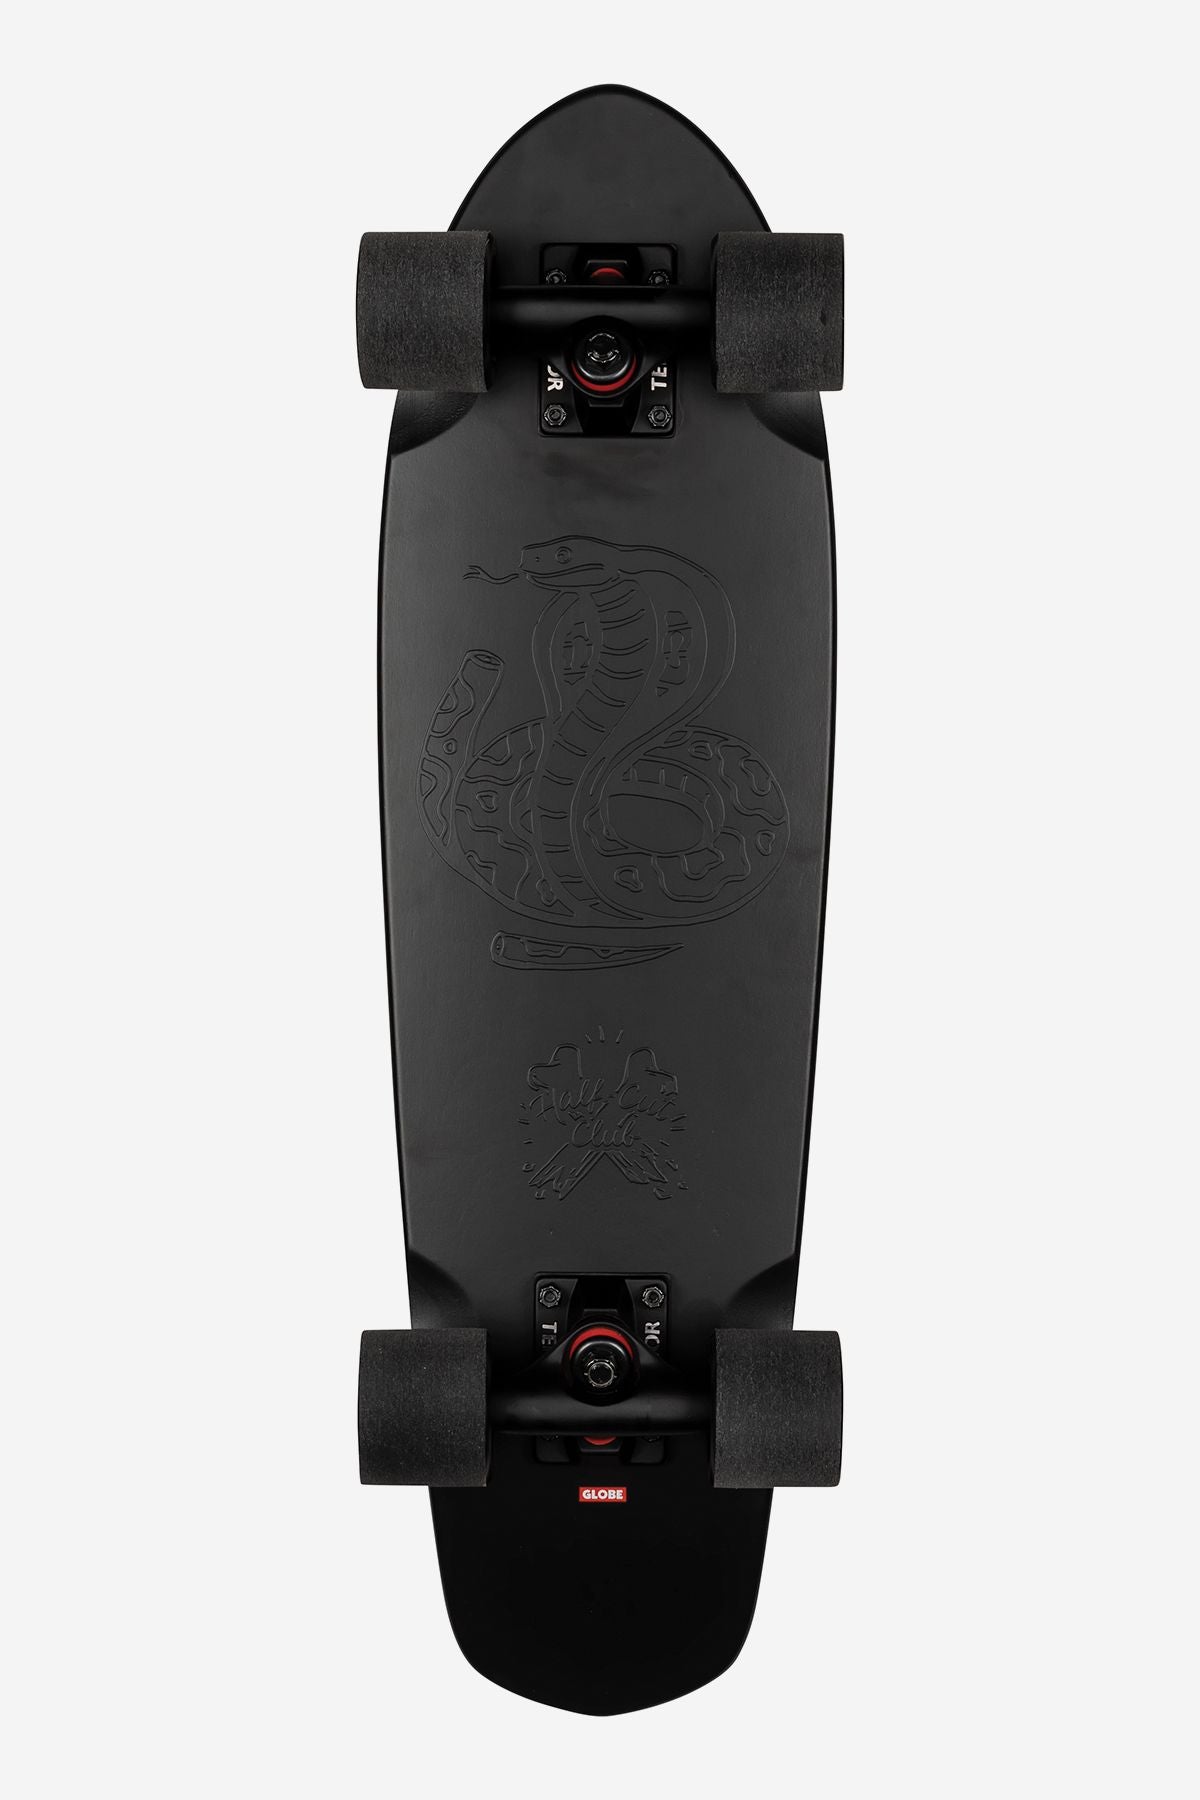 bottom graphic of Blazer 26" Cruiser - Black the F out